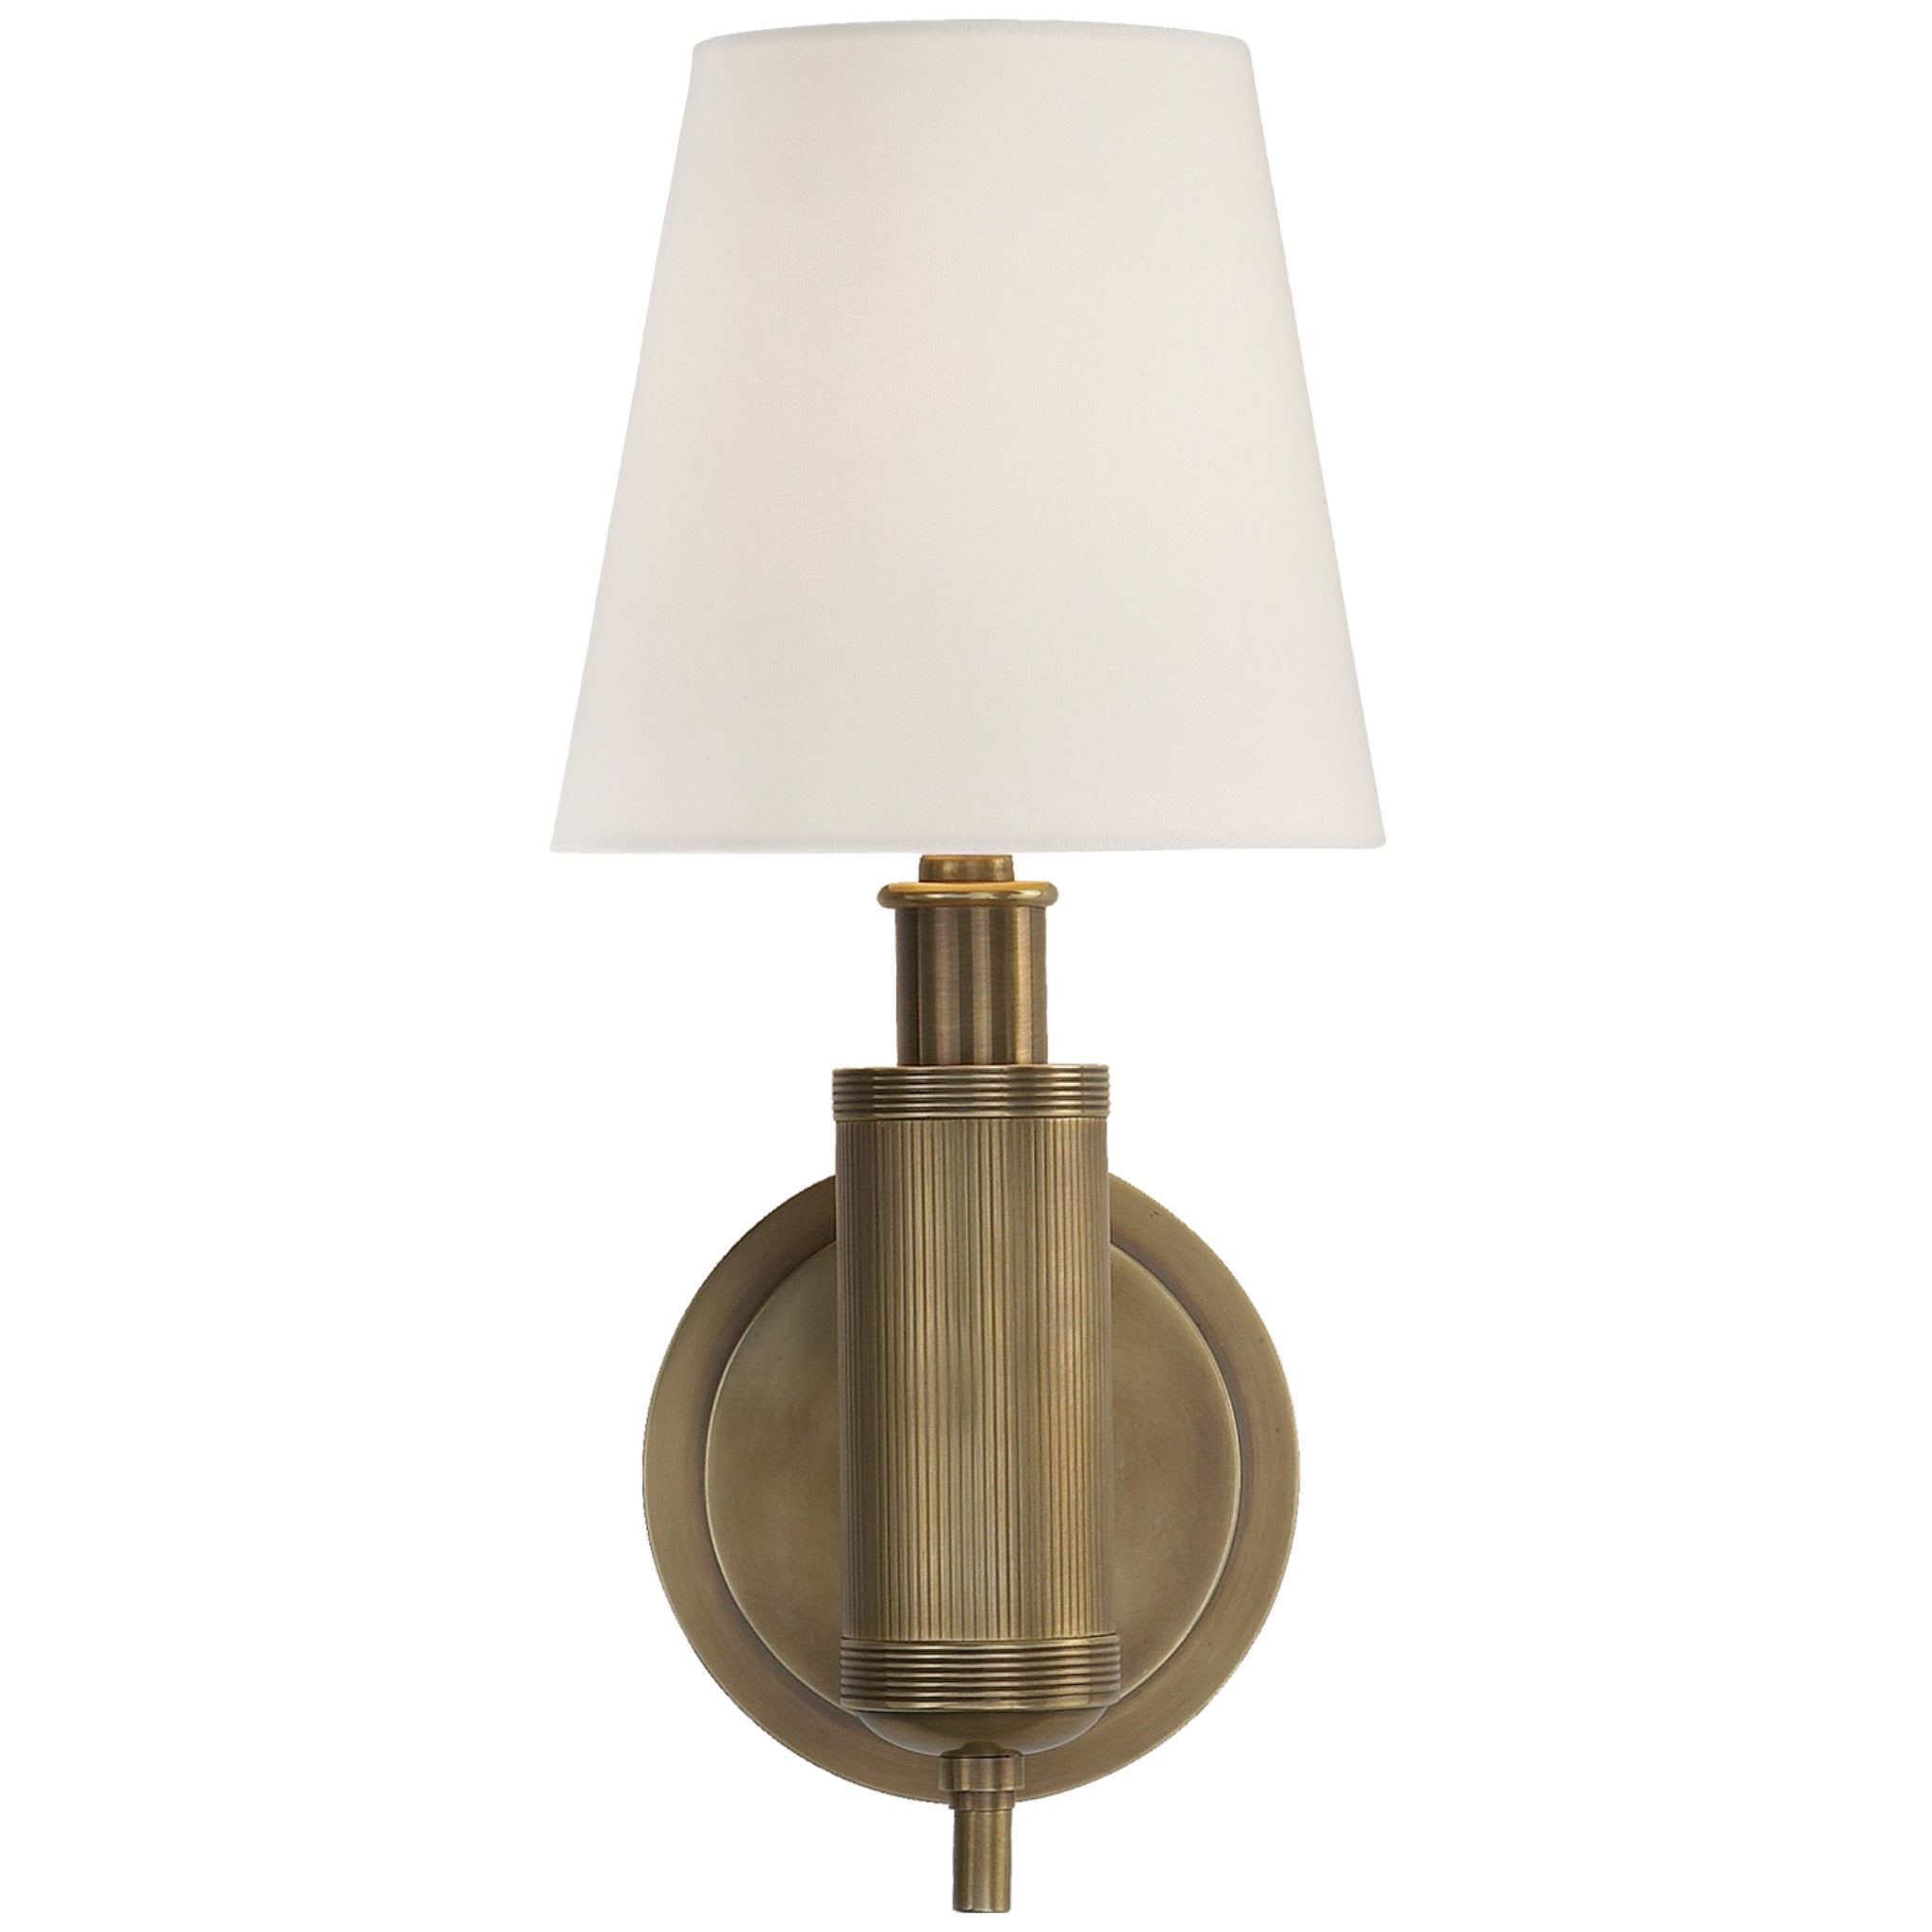 Thomas O'Brien Longacre Sconce in Hand-Rubbed Antique Brass with Linen Shade